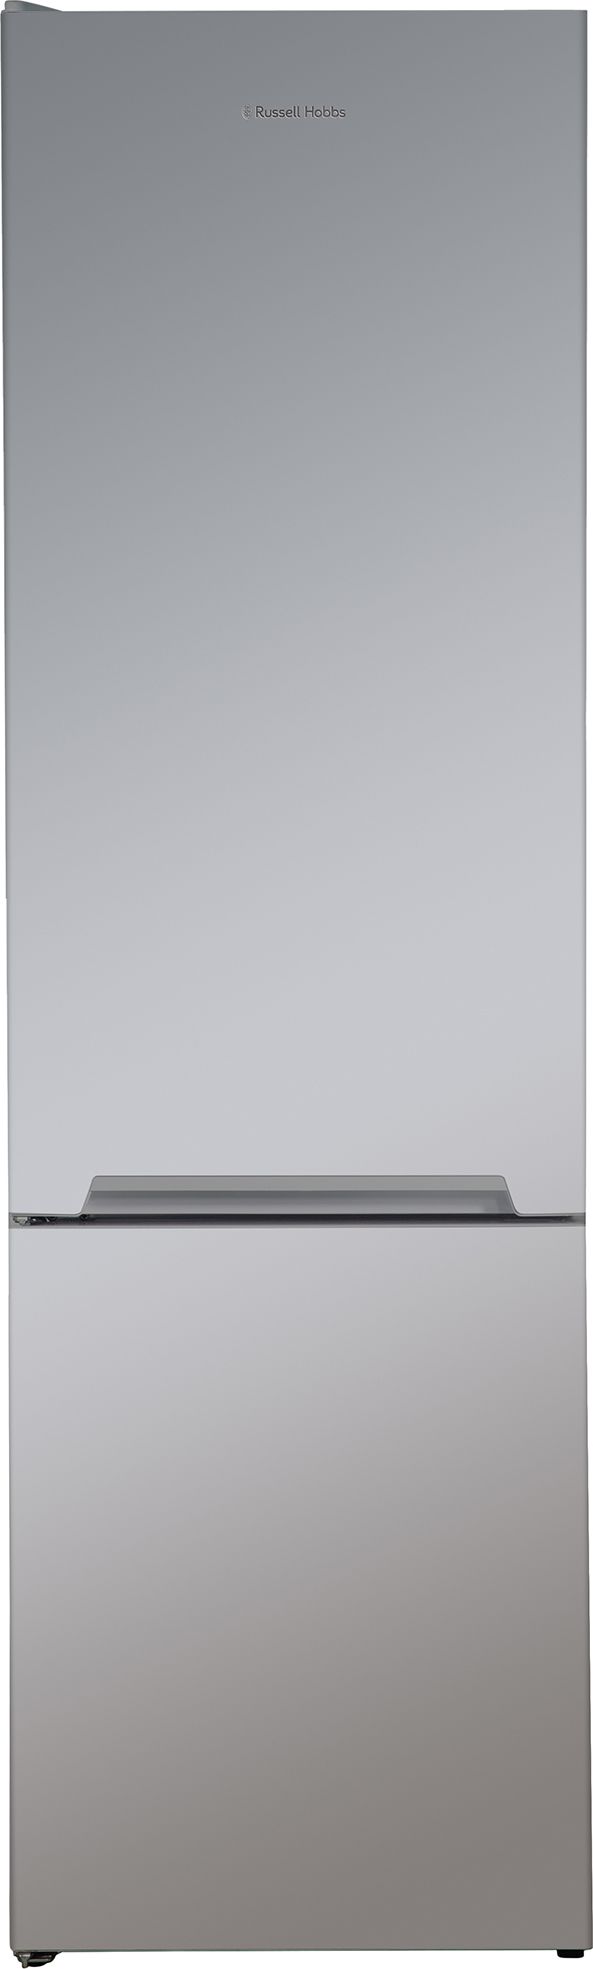 Russell Hobbs RH54FF180S 70/30 Fridge Freezer - Silver - F Rated, Silver